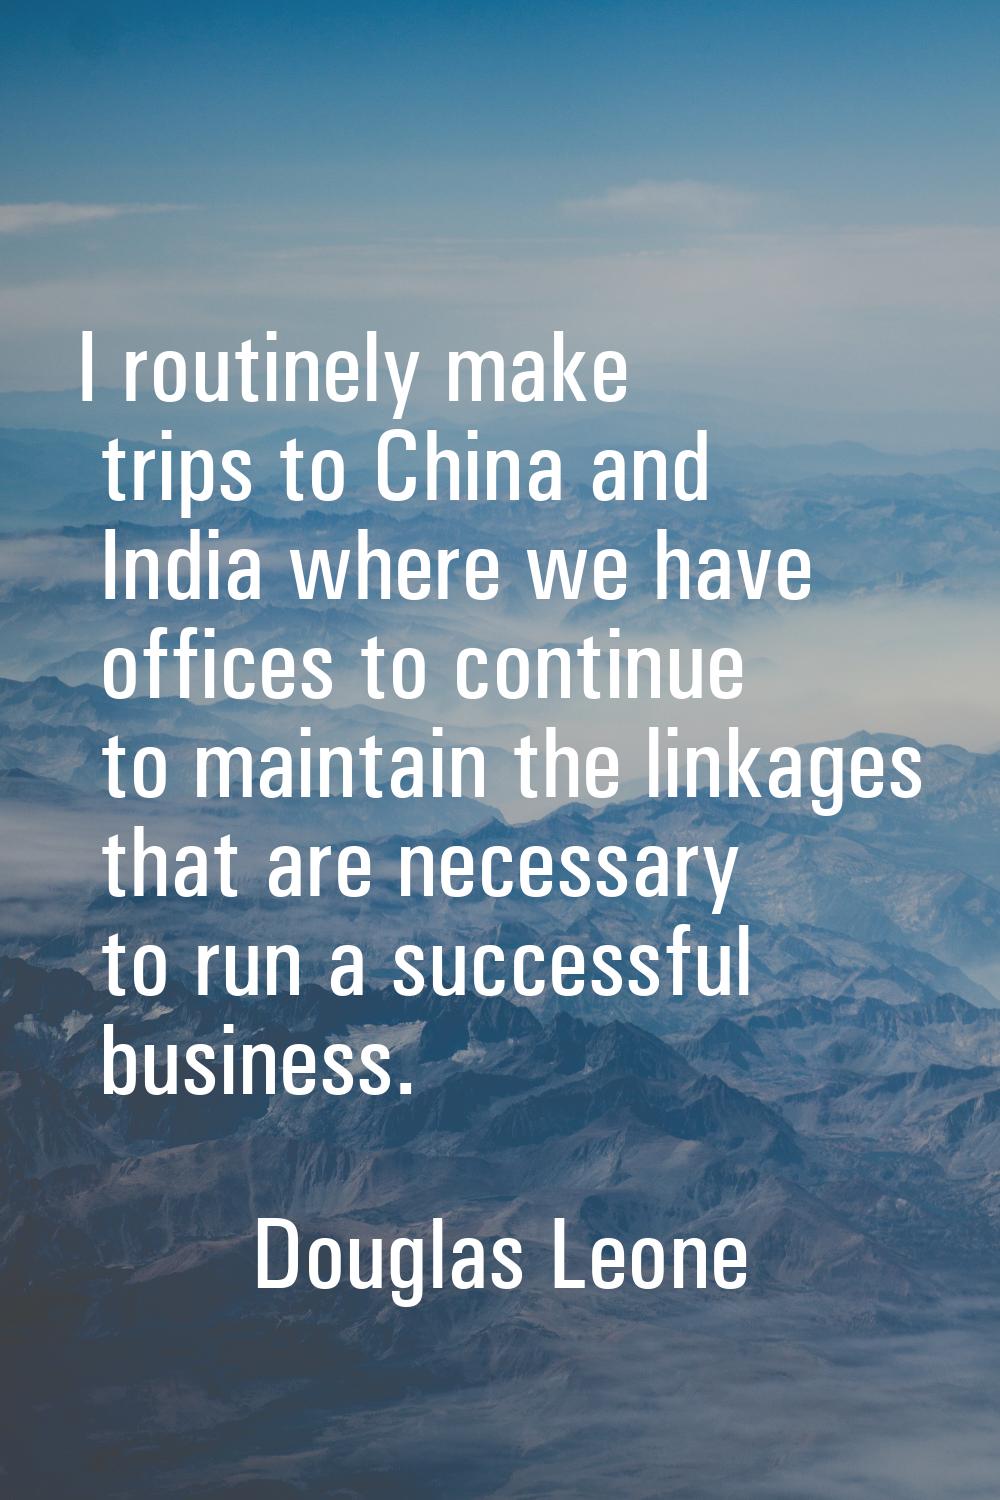 I routinely make trips to China and India where we have offices to continue to maintain the linkage